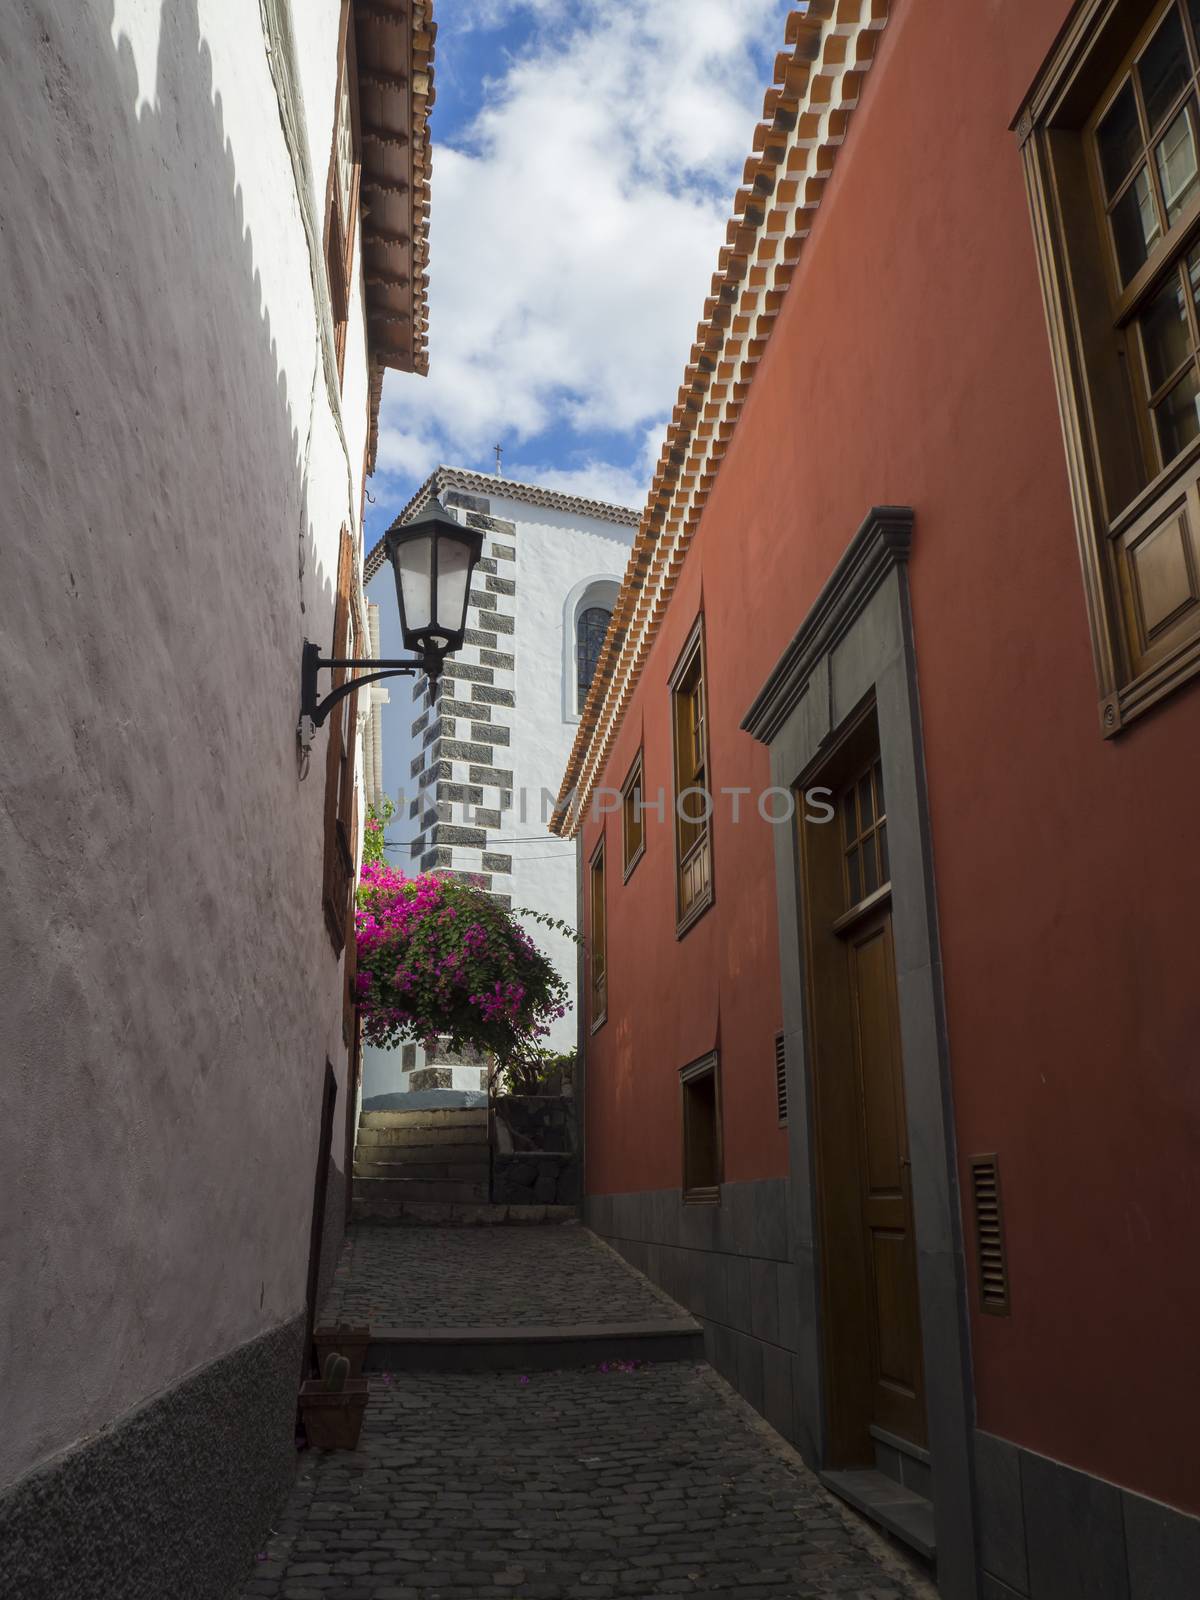 narrow street in old village garachico with traditional red and white houses latern flowers and blue sky by Henkeova